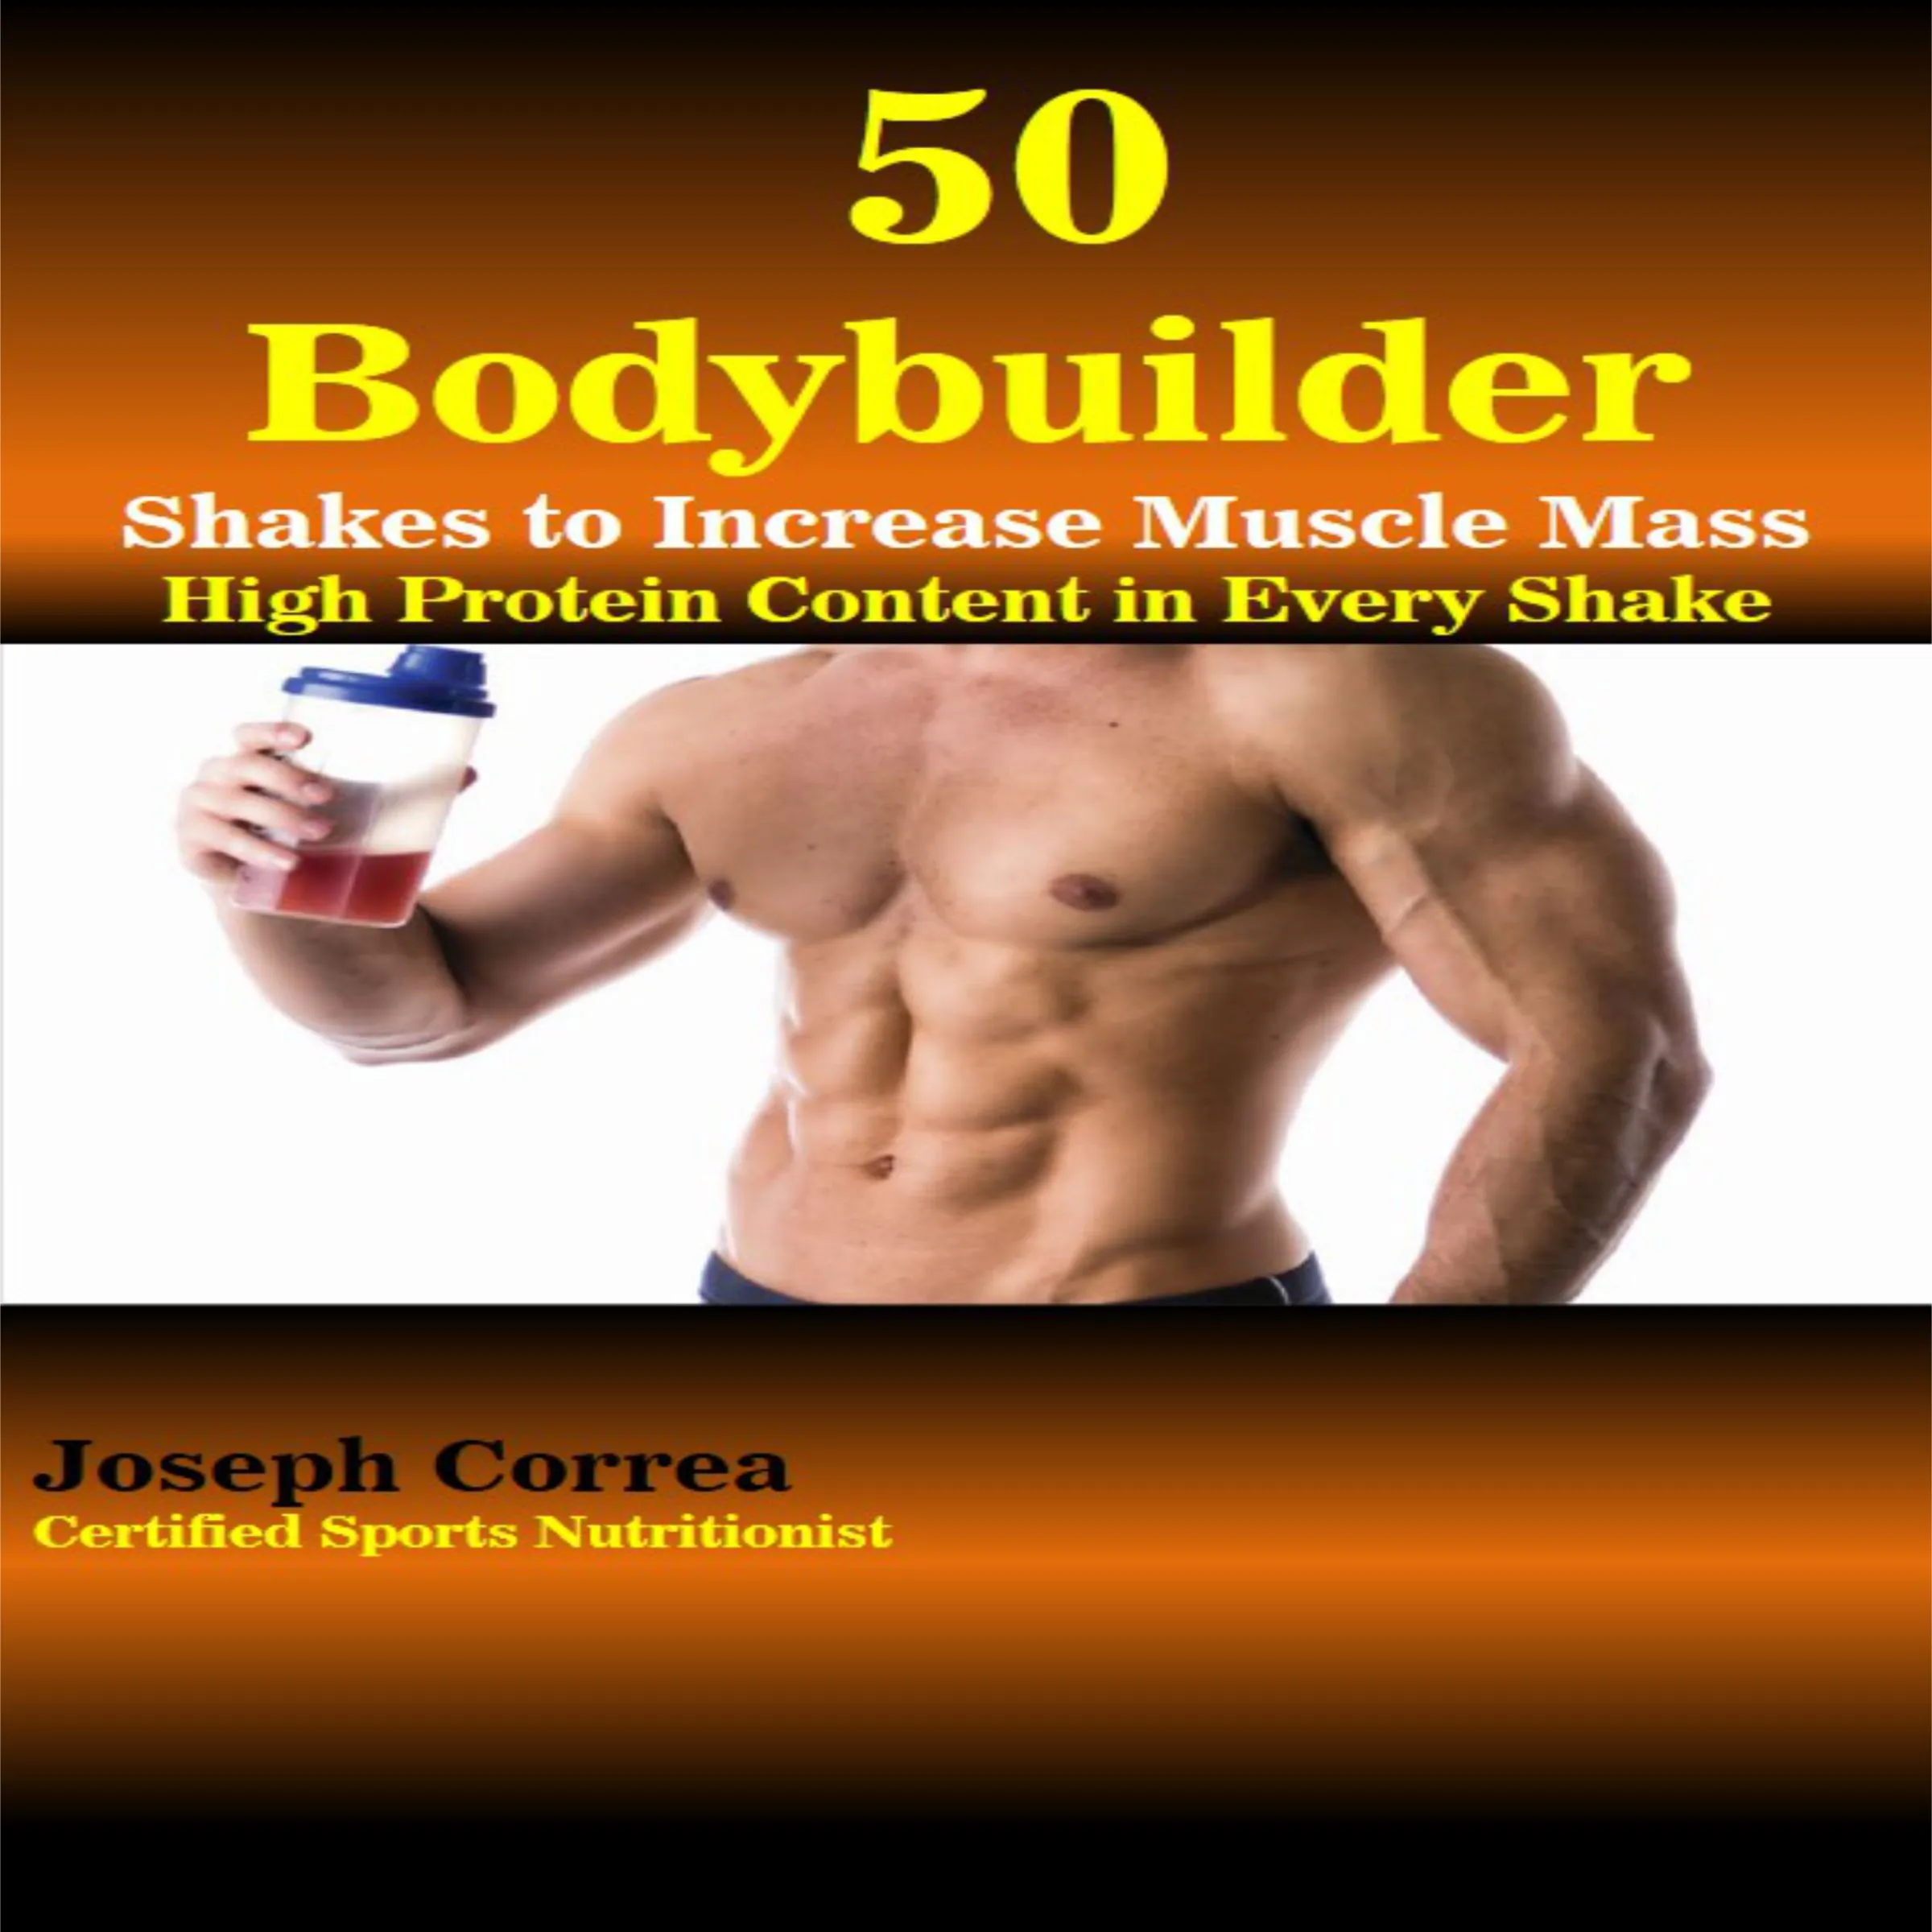 50 Bodybuilder Shakes to Increase Muscle Mass: High Protein Content in Every Shake Audiobook by Joseph Correa